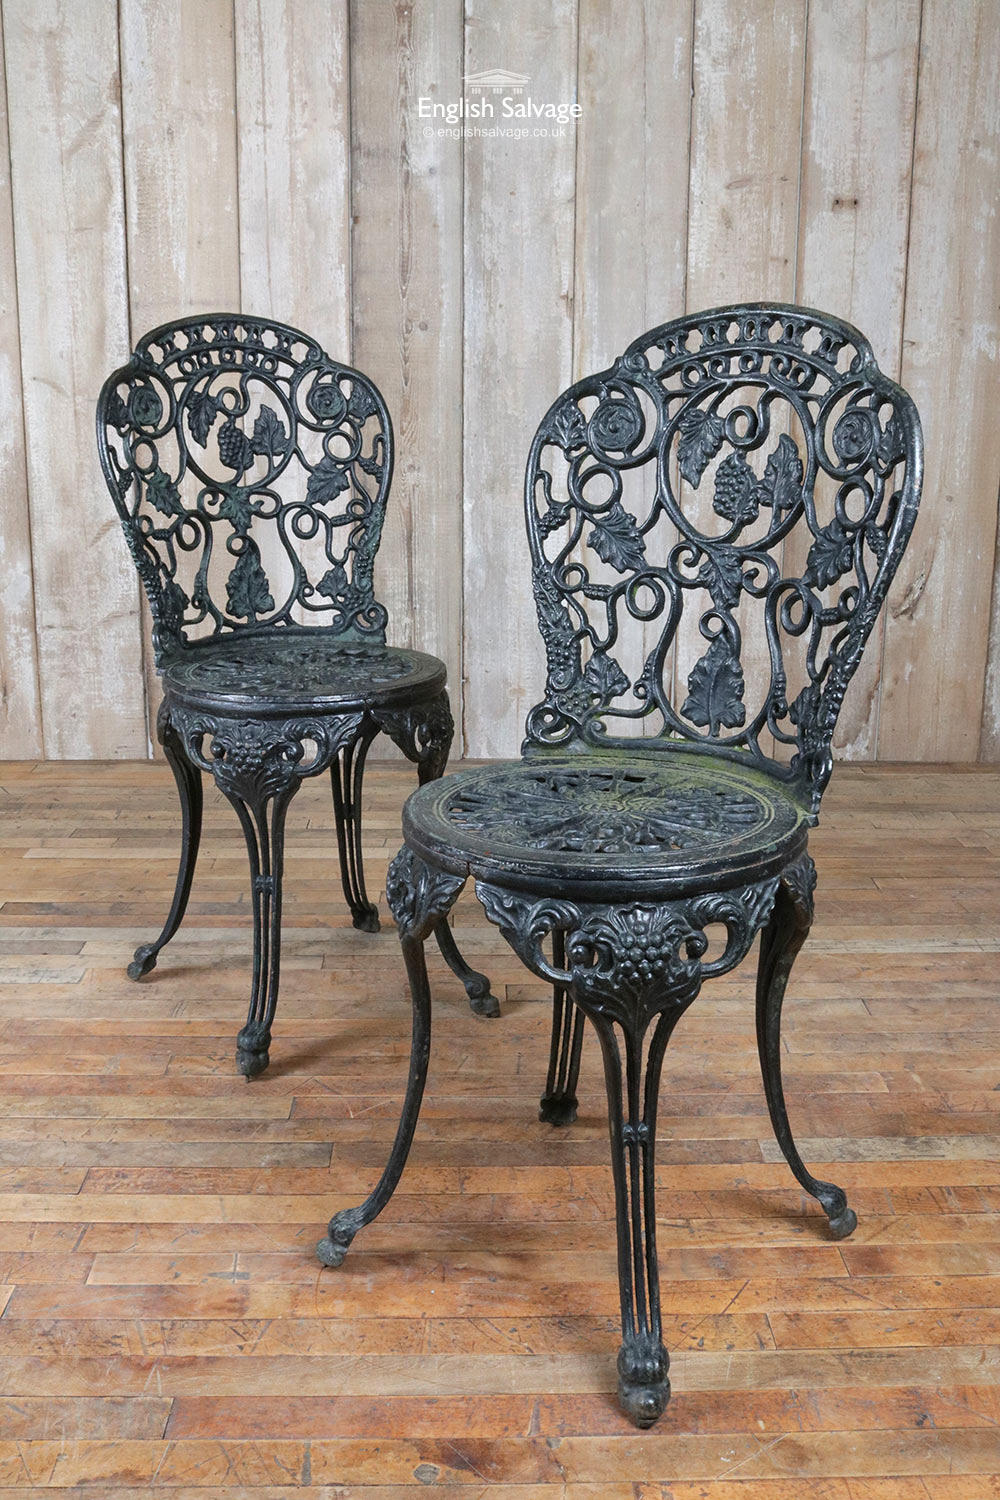 Original Black cast iron table and chairs